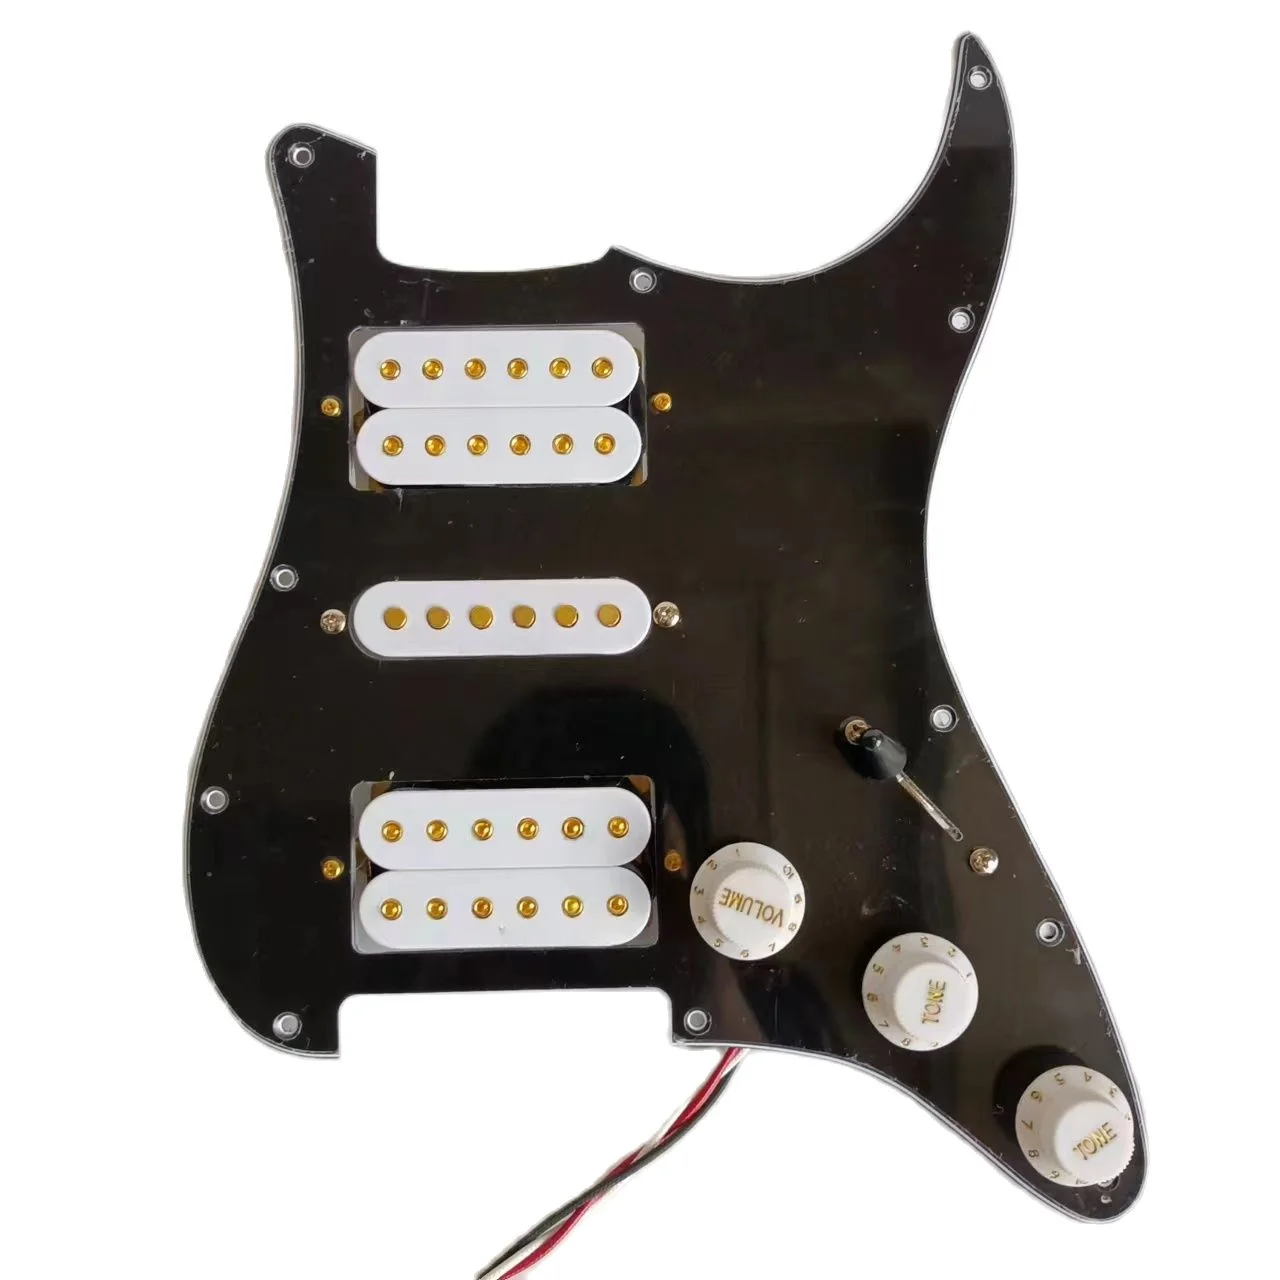 

Loaded Prewired RG Guitar Pickguard with HSH White Alnico V Humbucker Pickups Set Multifunction Switch Push Pull Potentiometer